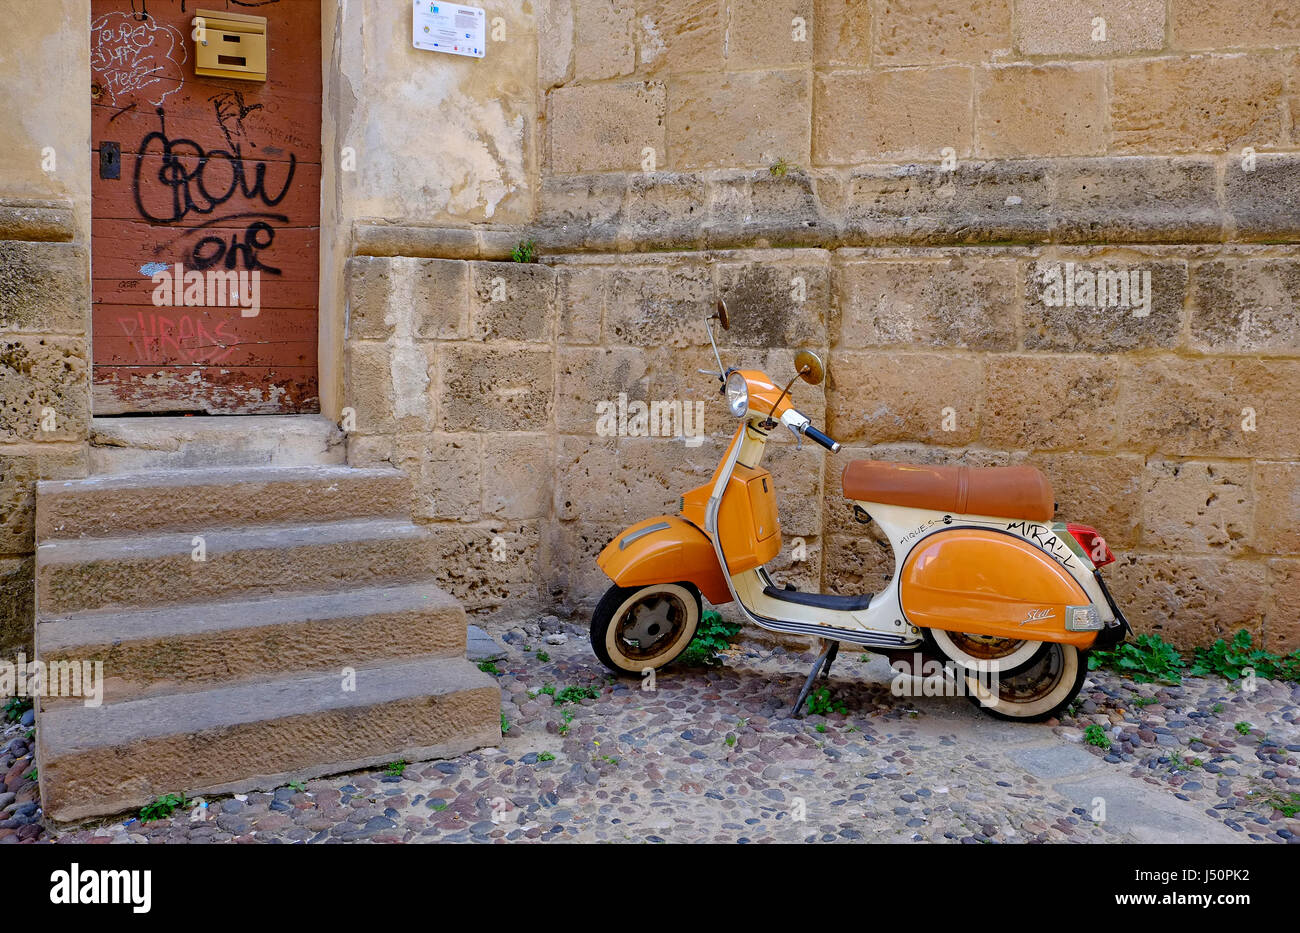 italian scooter parked outside old building exterior Stock Photo